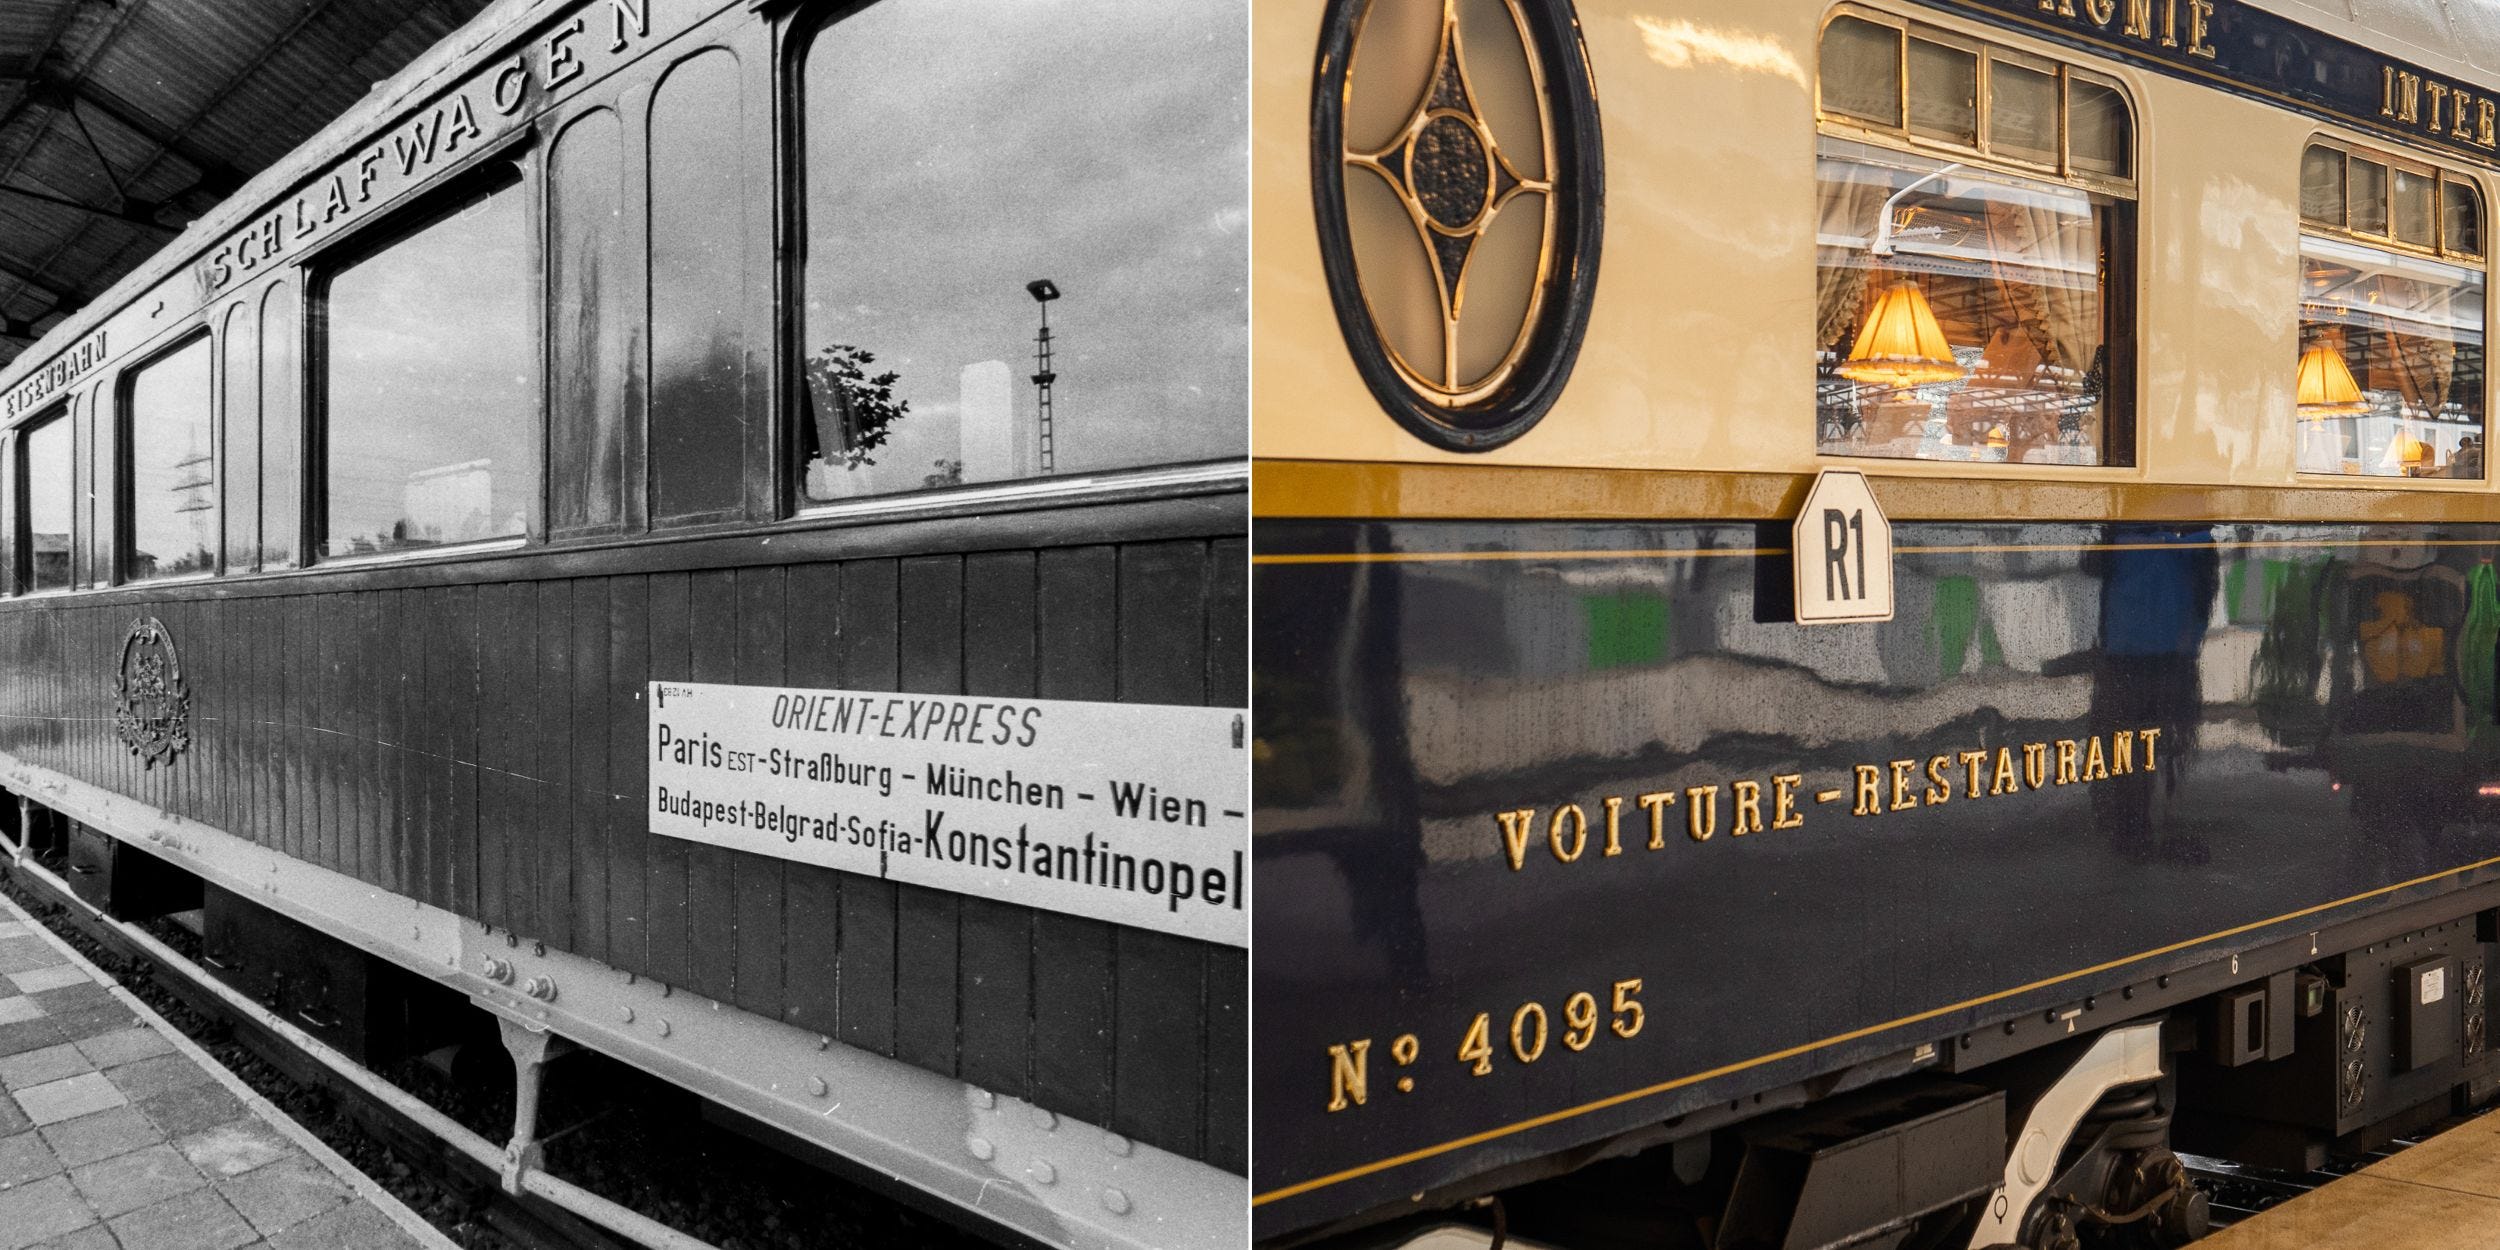 Then and now: Inside the legendary Orient Express train